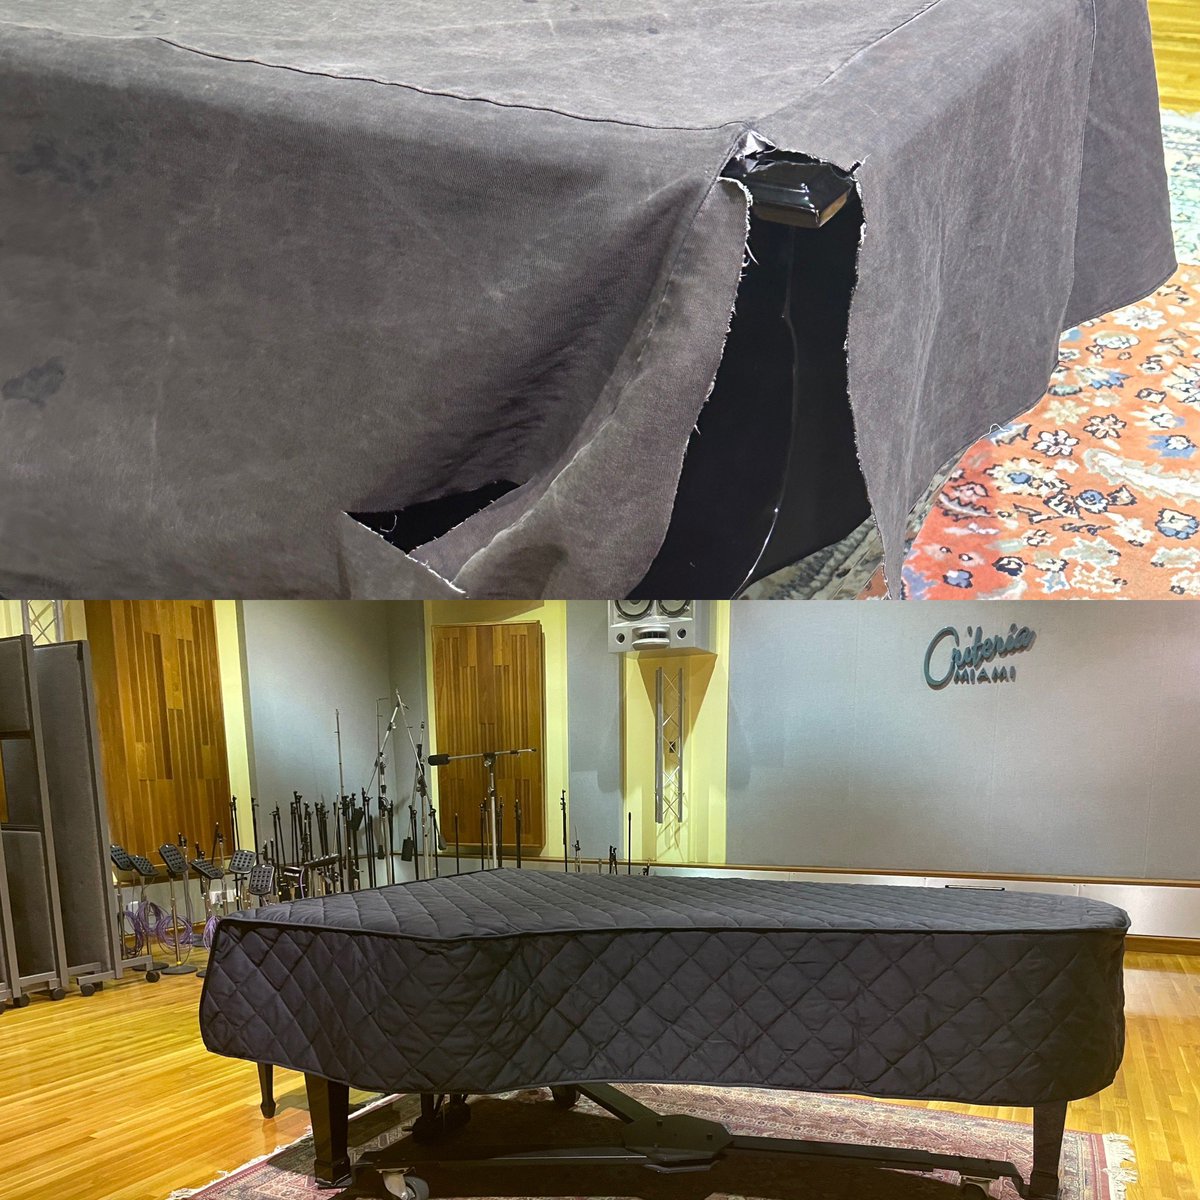 #fixitfriday

Studio A’s fantastic Yamaha CF3 9’ Concert Grand Piano just got some custom new duds

Take care of your tools, and they will take care of you

#piano #yamaha #cf3 #thisaintyourdaddyspiano #criteria #recordingstudio #respecttheroom #pursuitoflegendaryexcellence